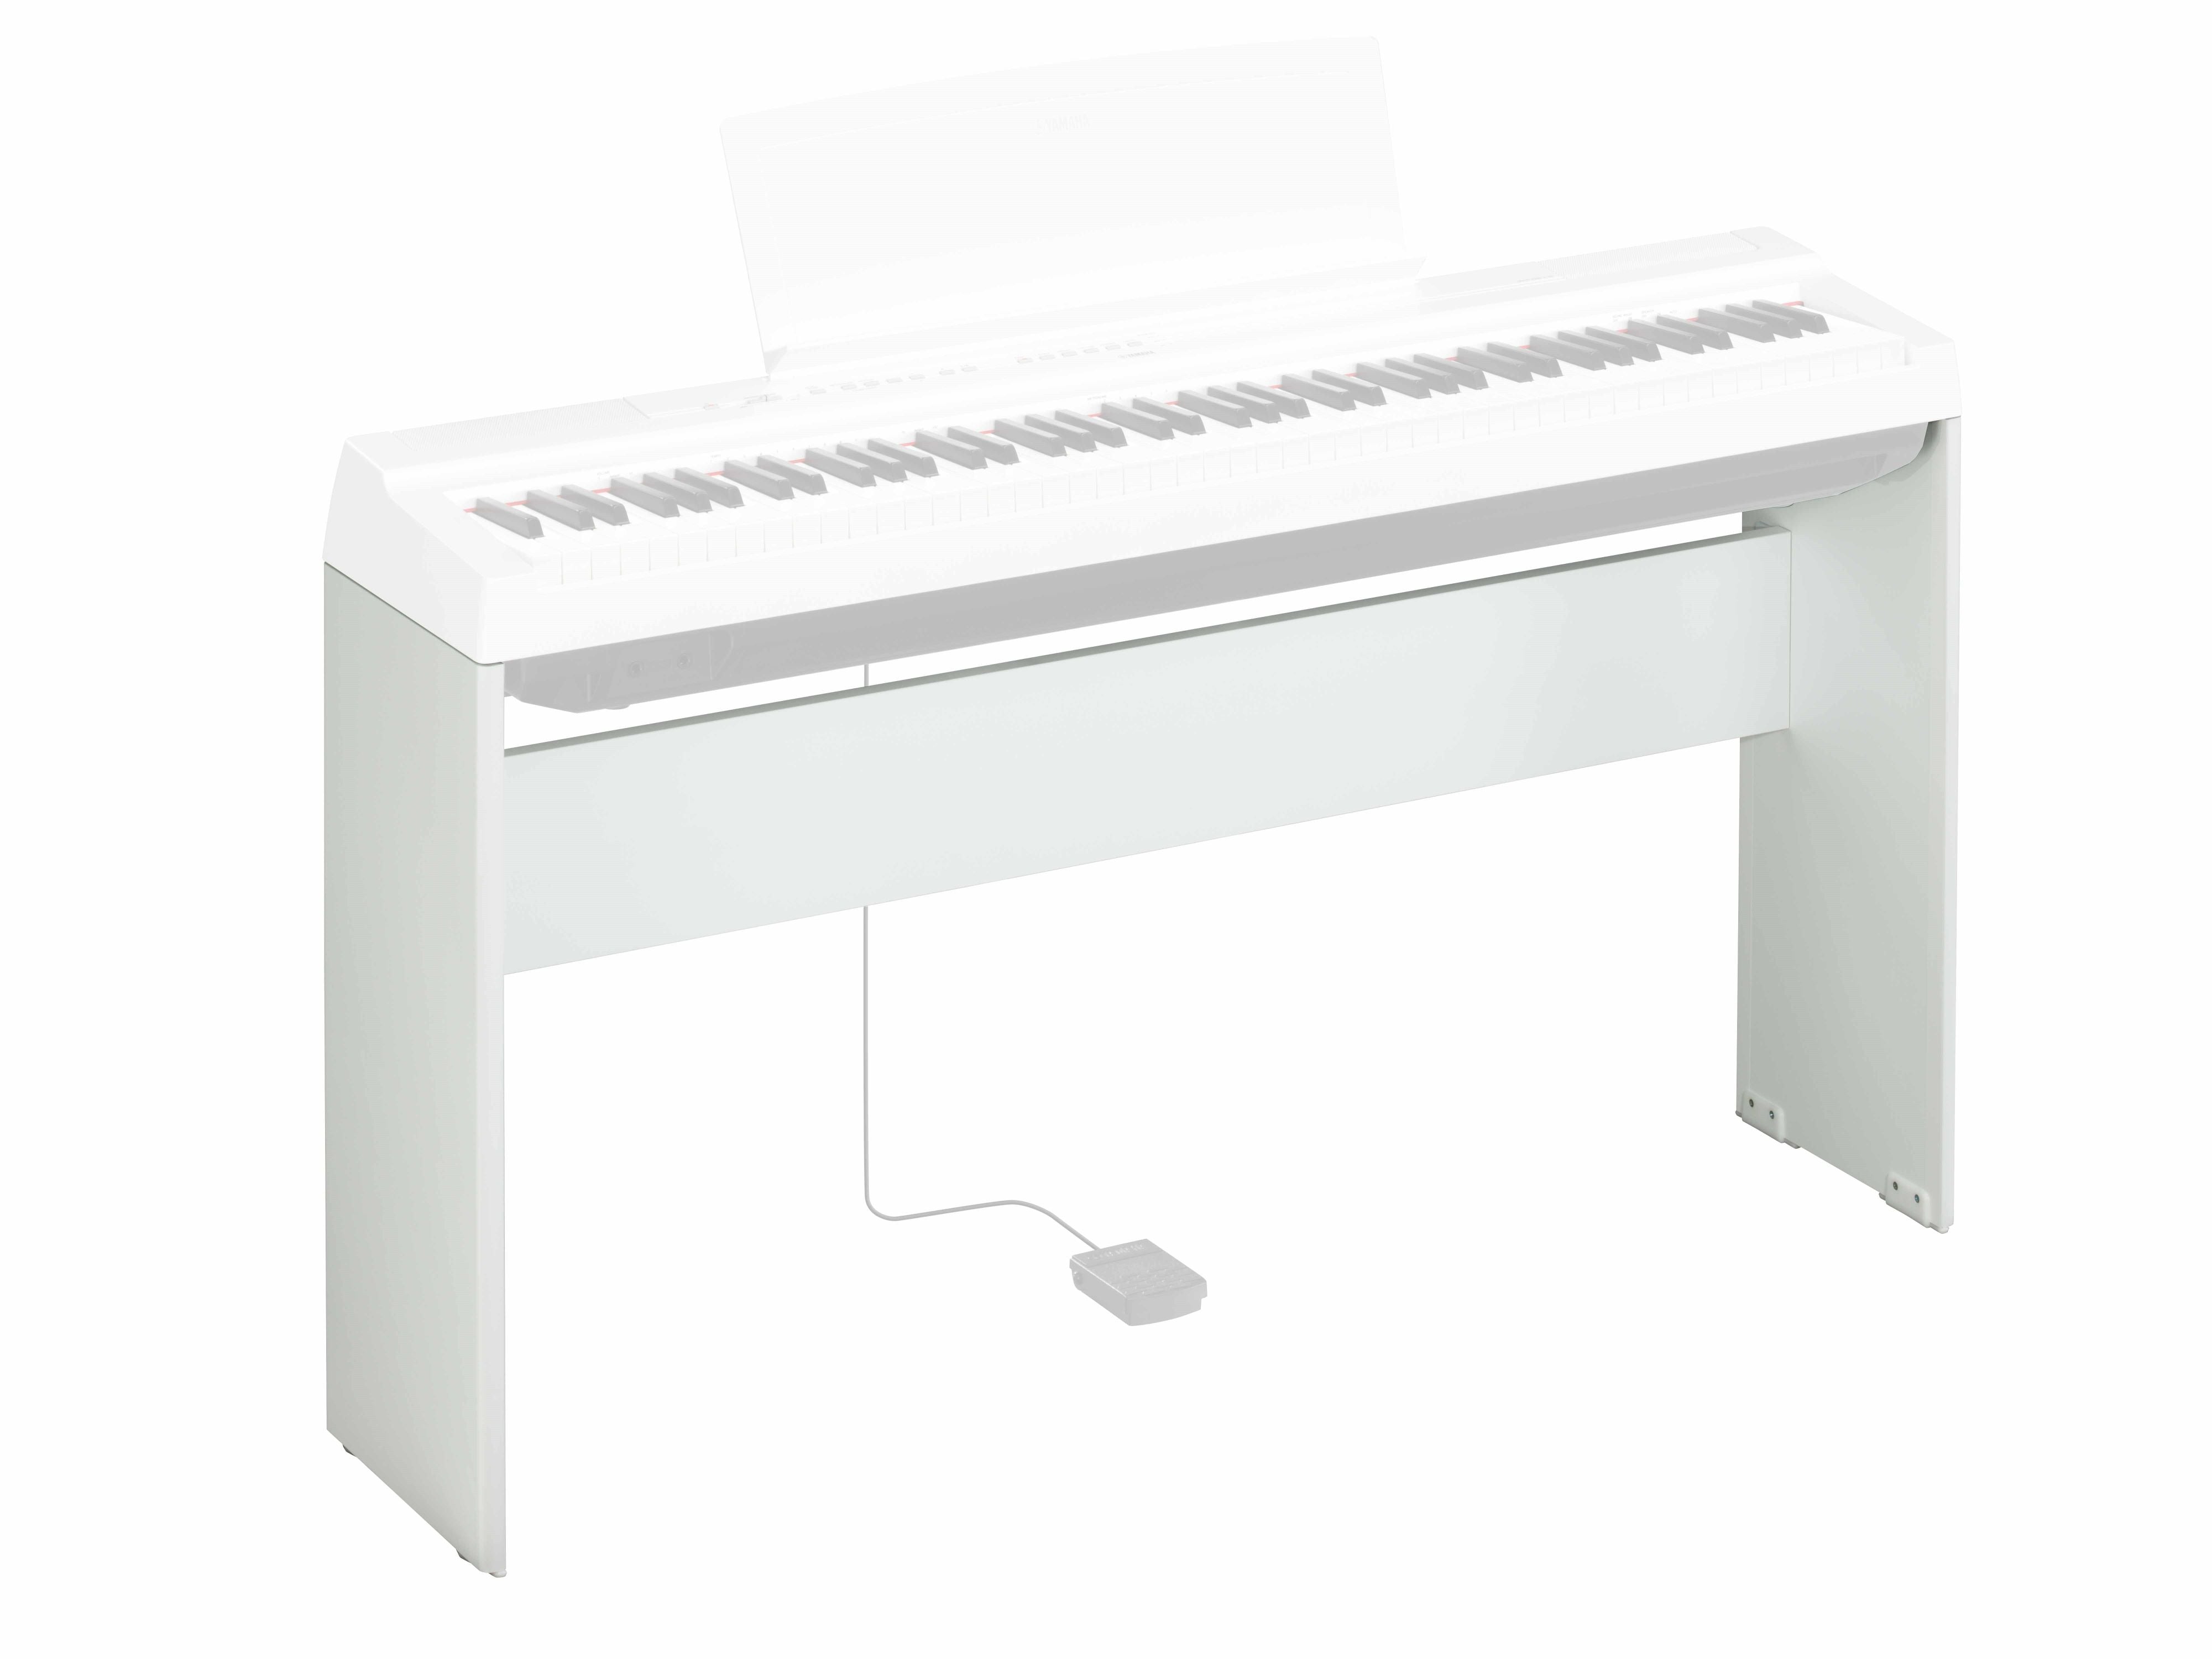 Yamaha L-125 Stand for P-125 Digital Piano